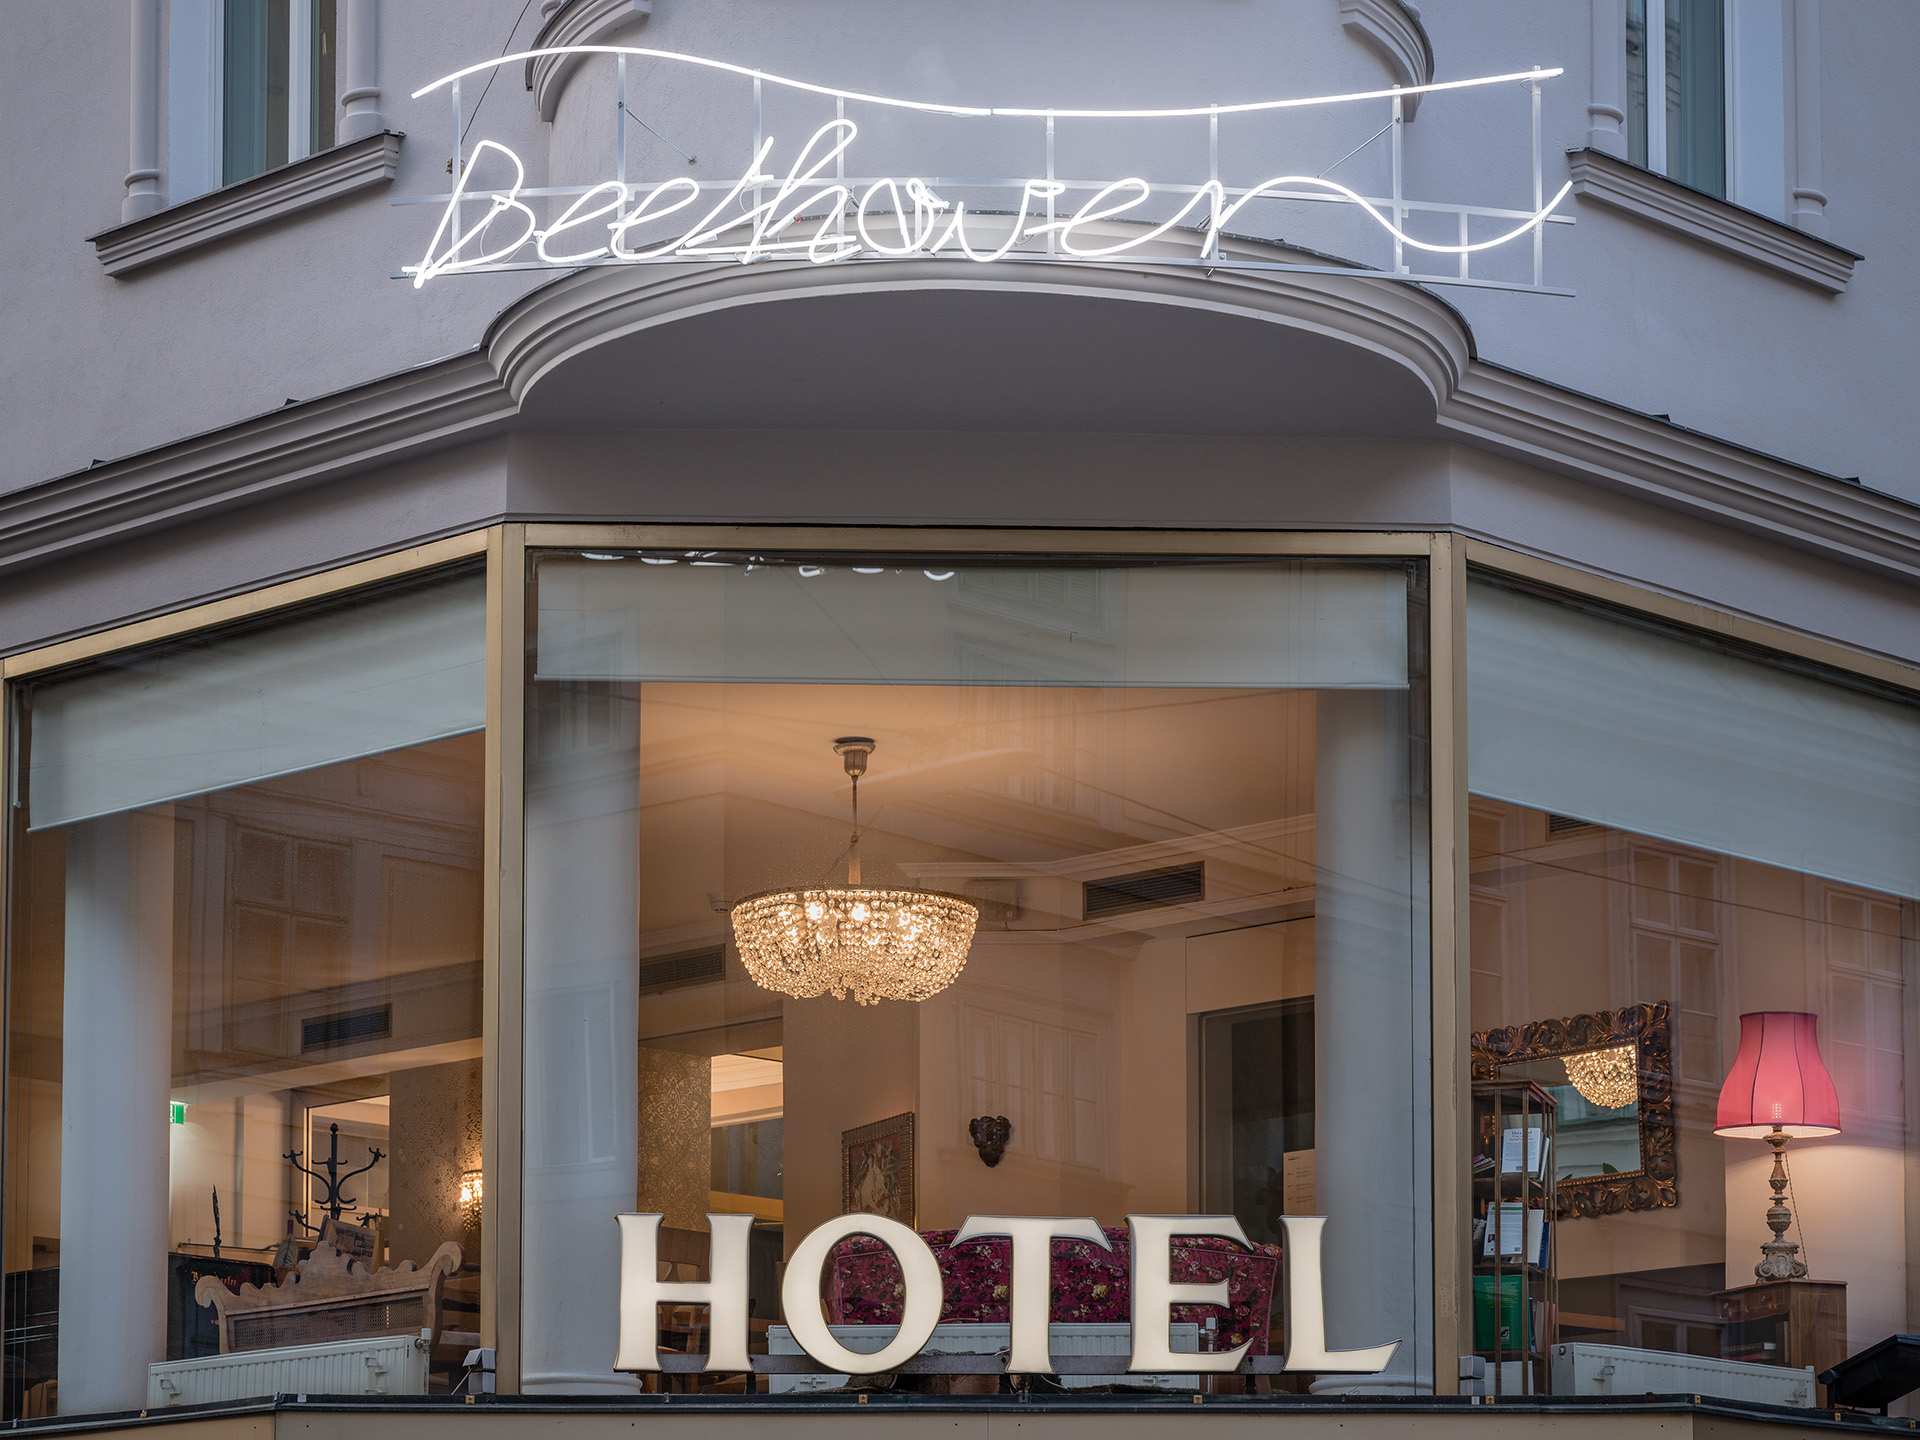 The exterior of Hotel Beethoven